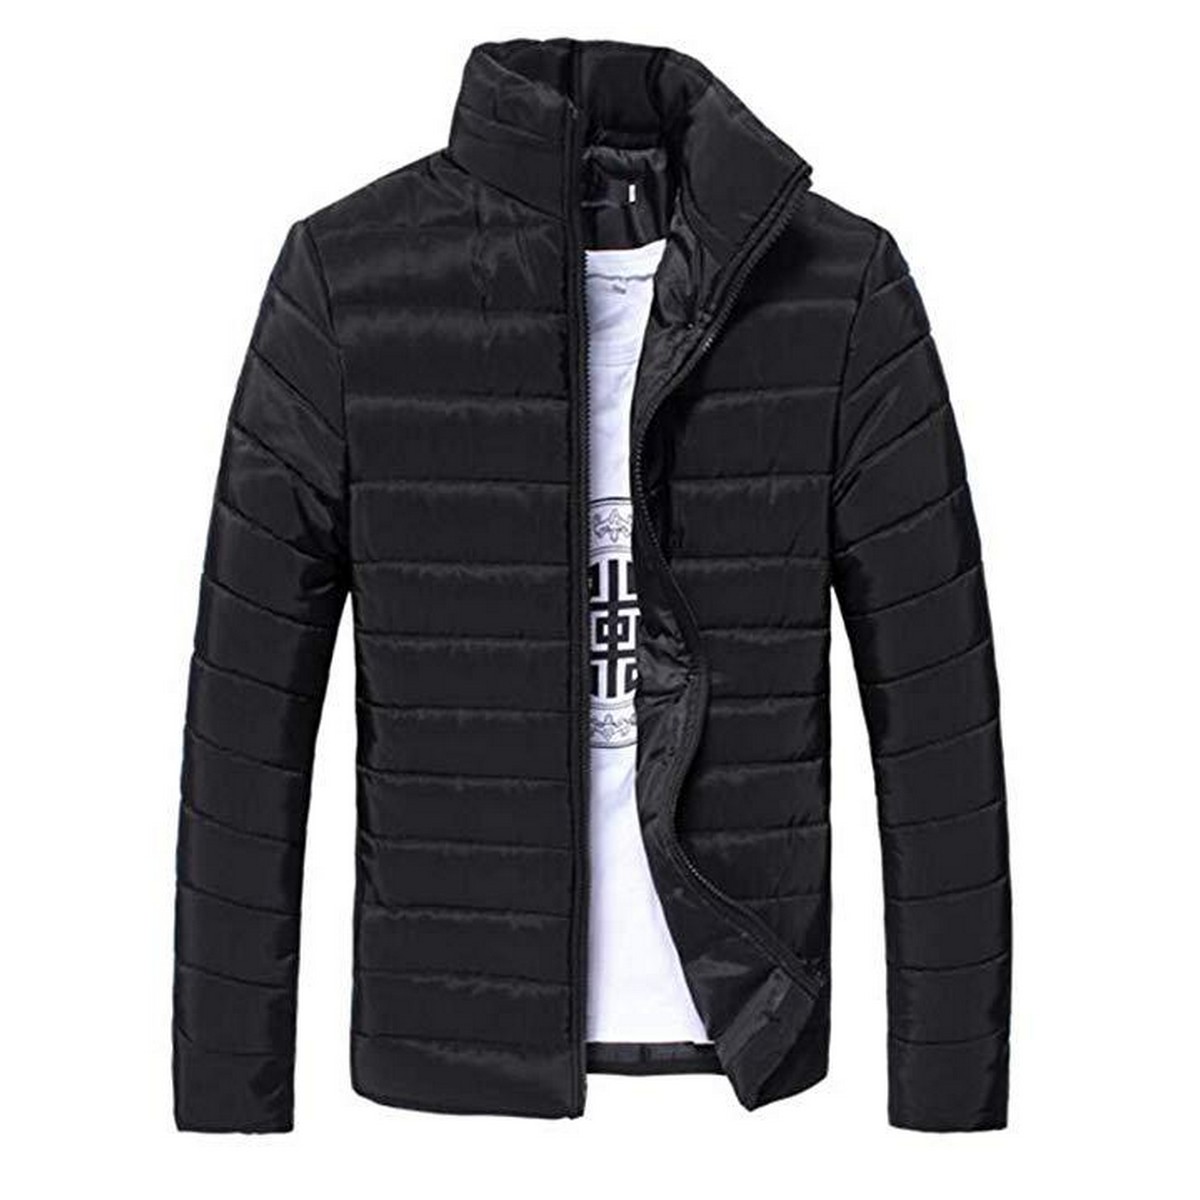 Black Puffer Jacket For Men Price in Pakistan - View Latest Collection ...